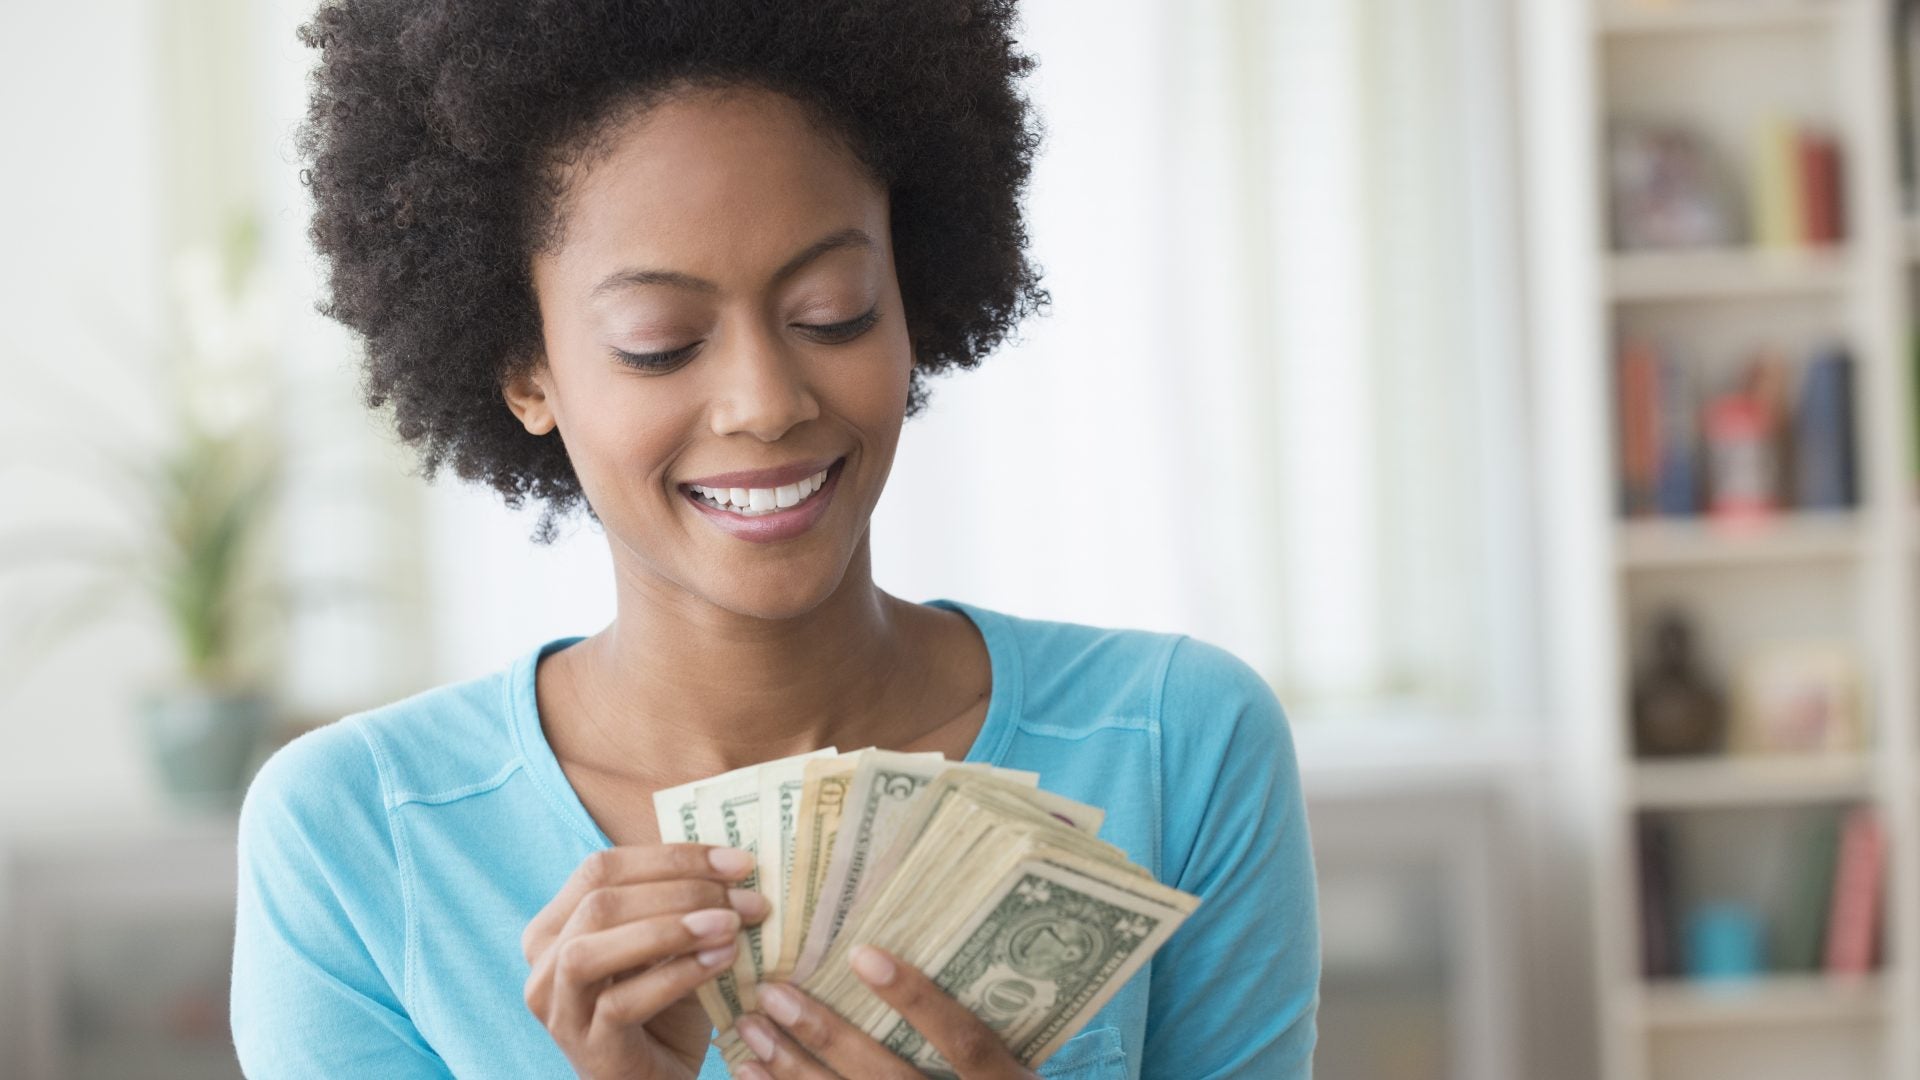 5 Tips To Make September Your Financial 'Self-Care' Month